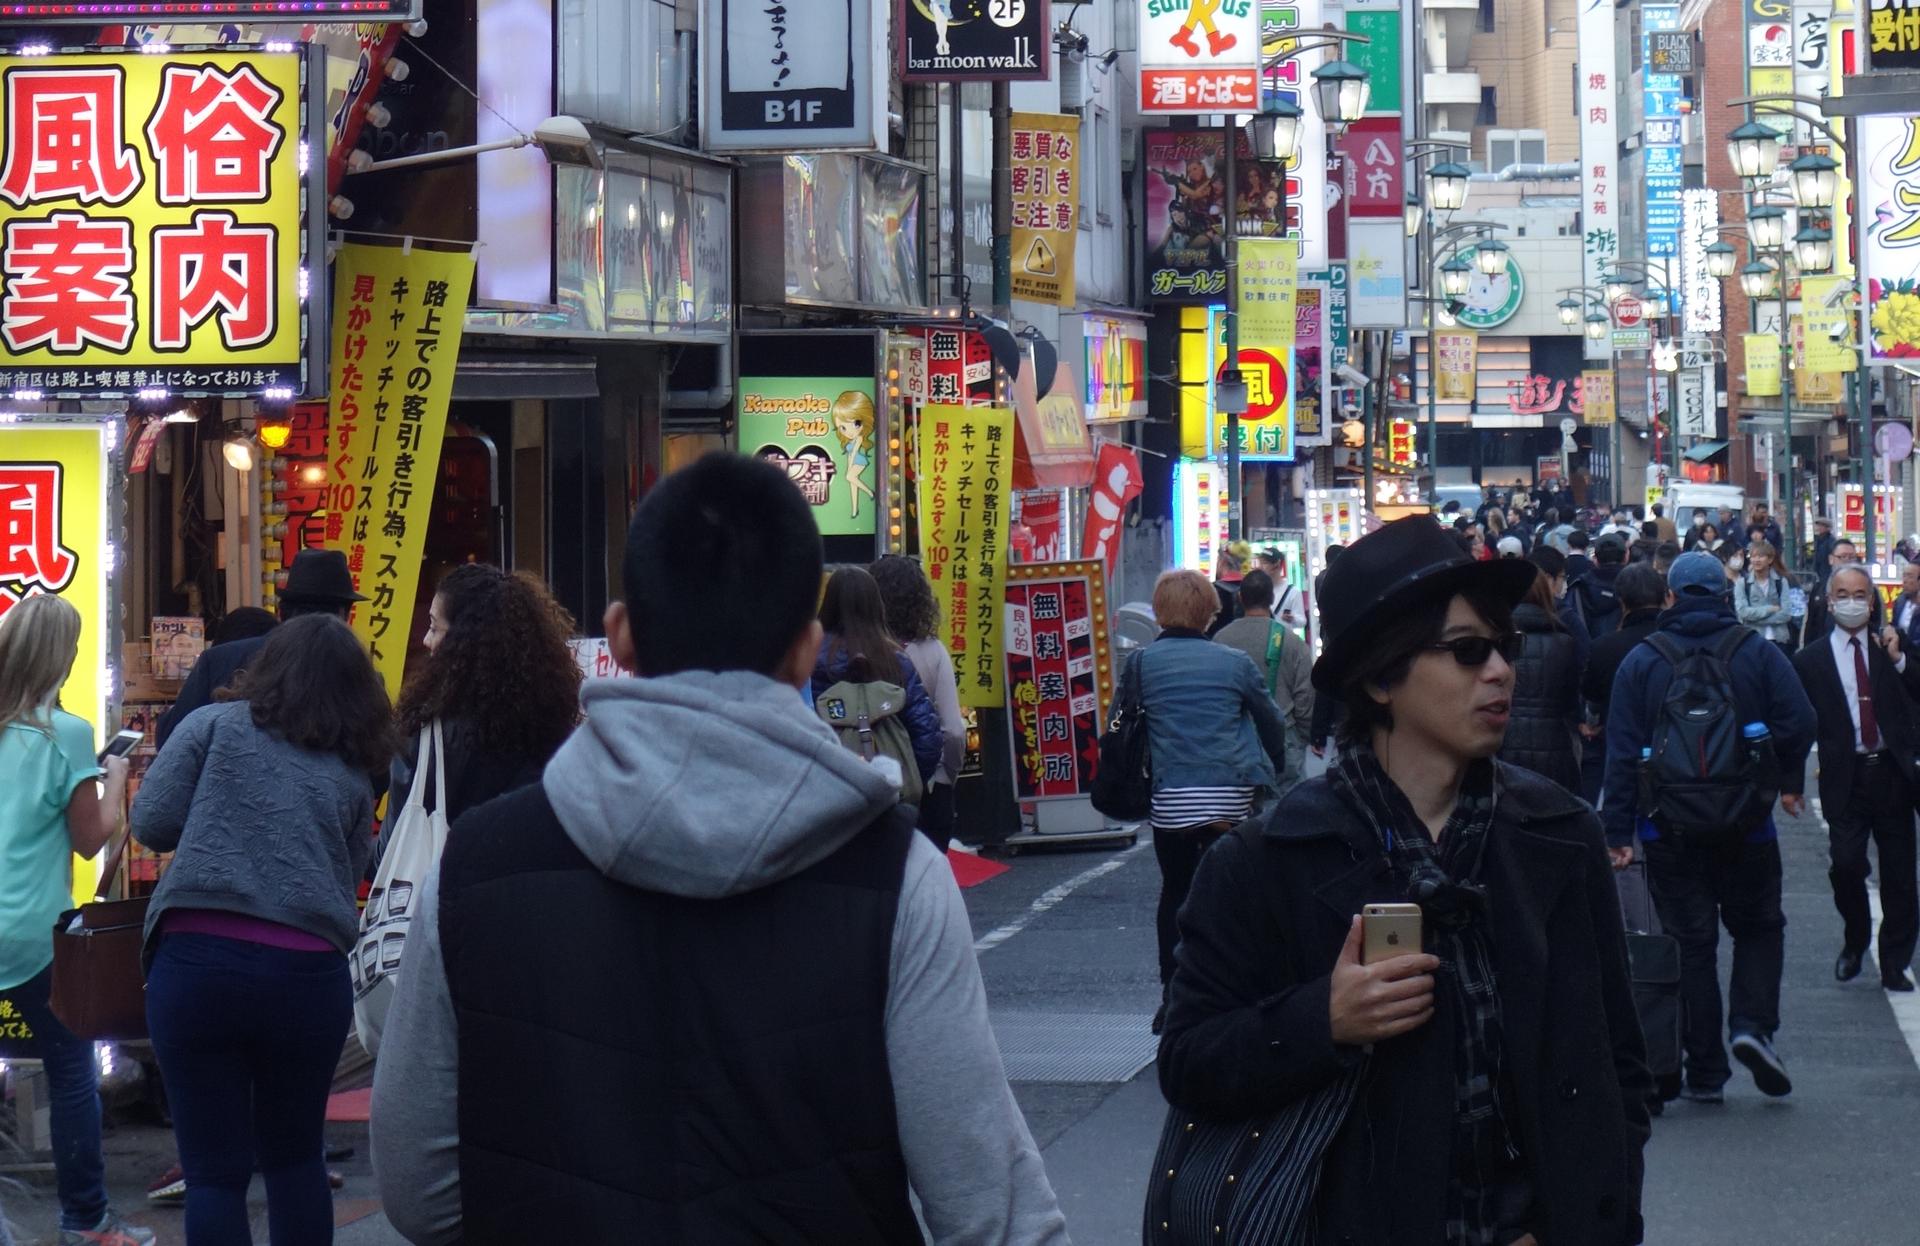 Tokyo's streets are still hopping, after more than two 'lost decades' of low or flat economic growth.